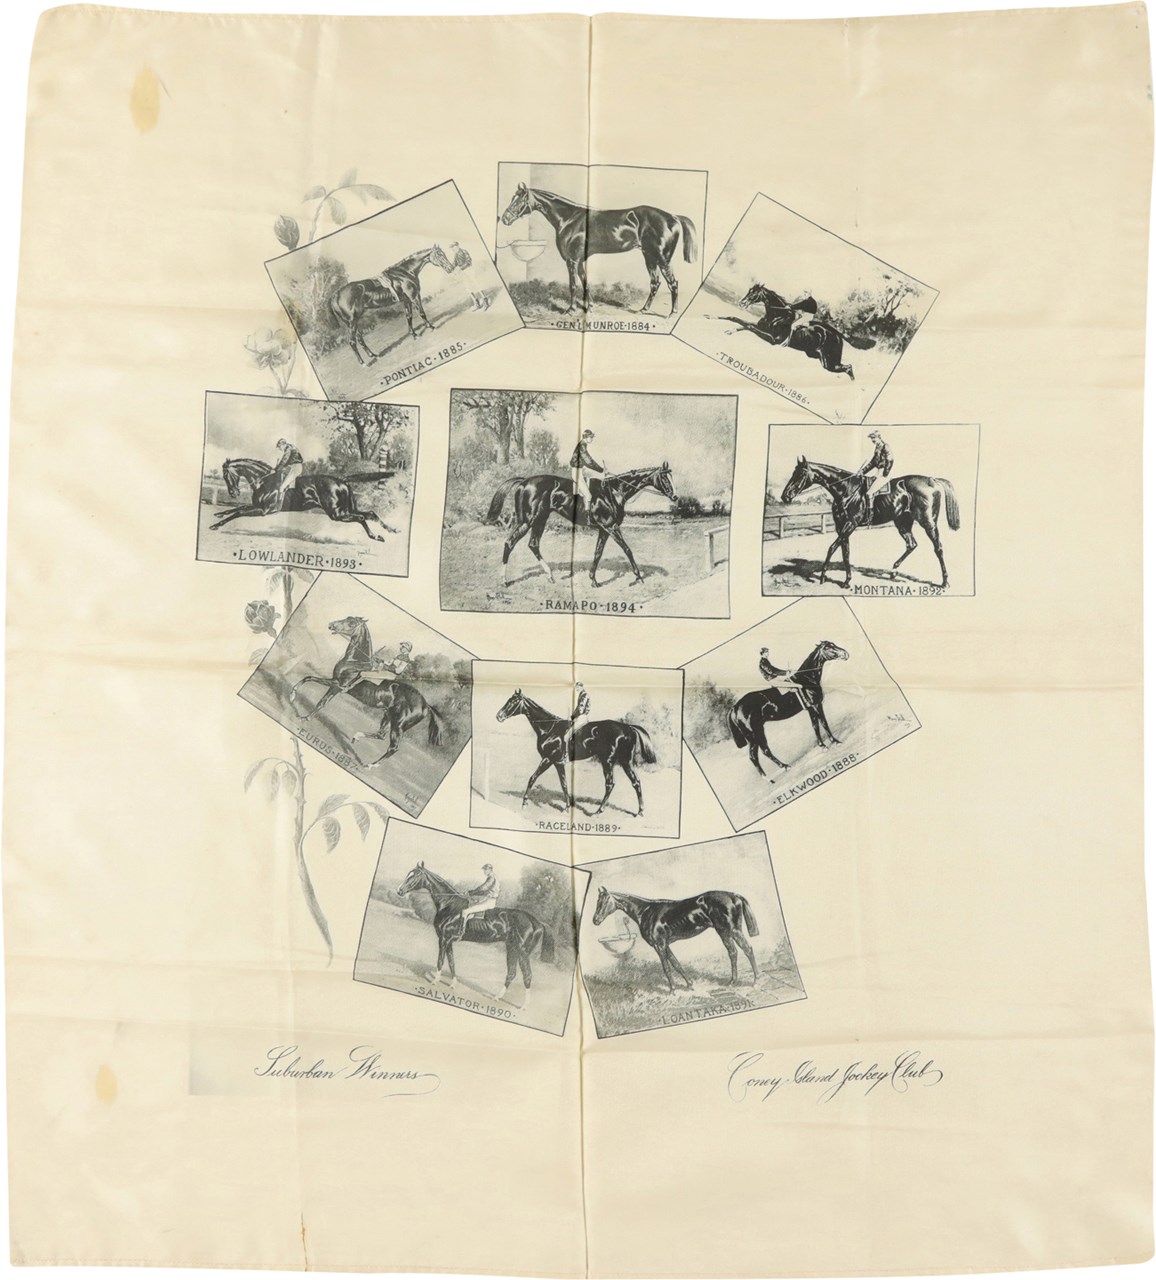 - Stunning Silk Showing the 11 Winners of the Suburban Handicap from 1884 Through 1894